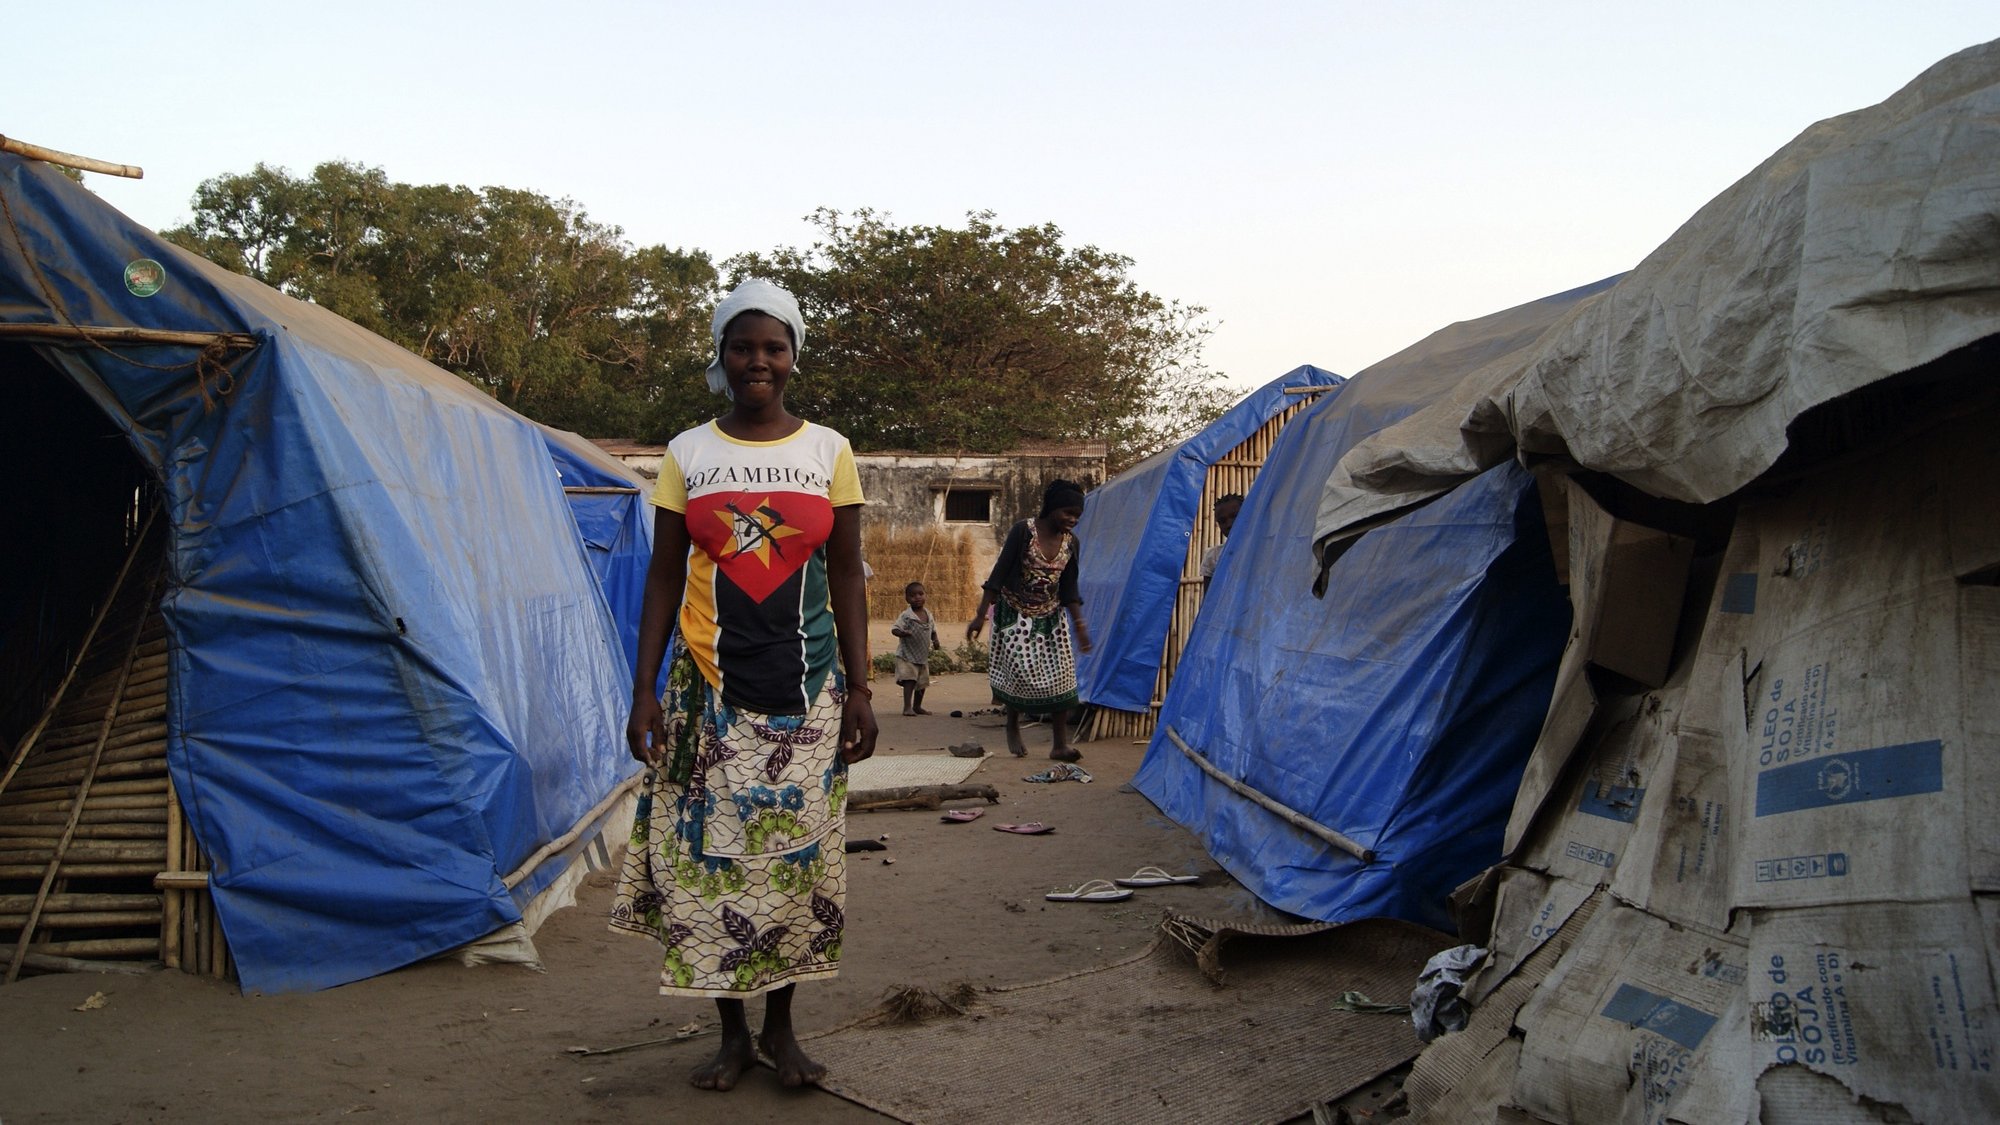 Women and children in one of the shelter camps in Metuge, a space housing displaced people fleeing armed violence in northern Mozambique. Cabo Delgado, Mozambique, 16 August 2021 (issue on 17 August 2021). Following the attacks, which have terrorized Cabo Delgado province since 2017, there are more than 3,100 deaths, according to the ACLED conflict registration project, and more than 817,000 displaced people, according to Mozambican authorities. LUISA NHANTUMBO/LUSA